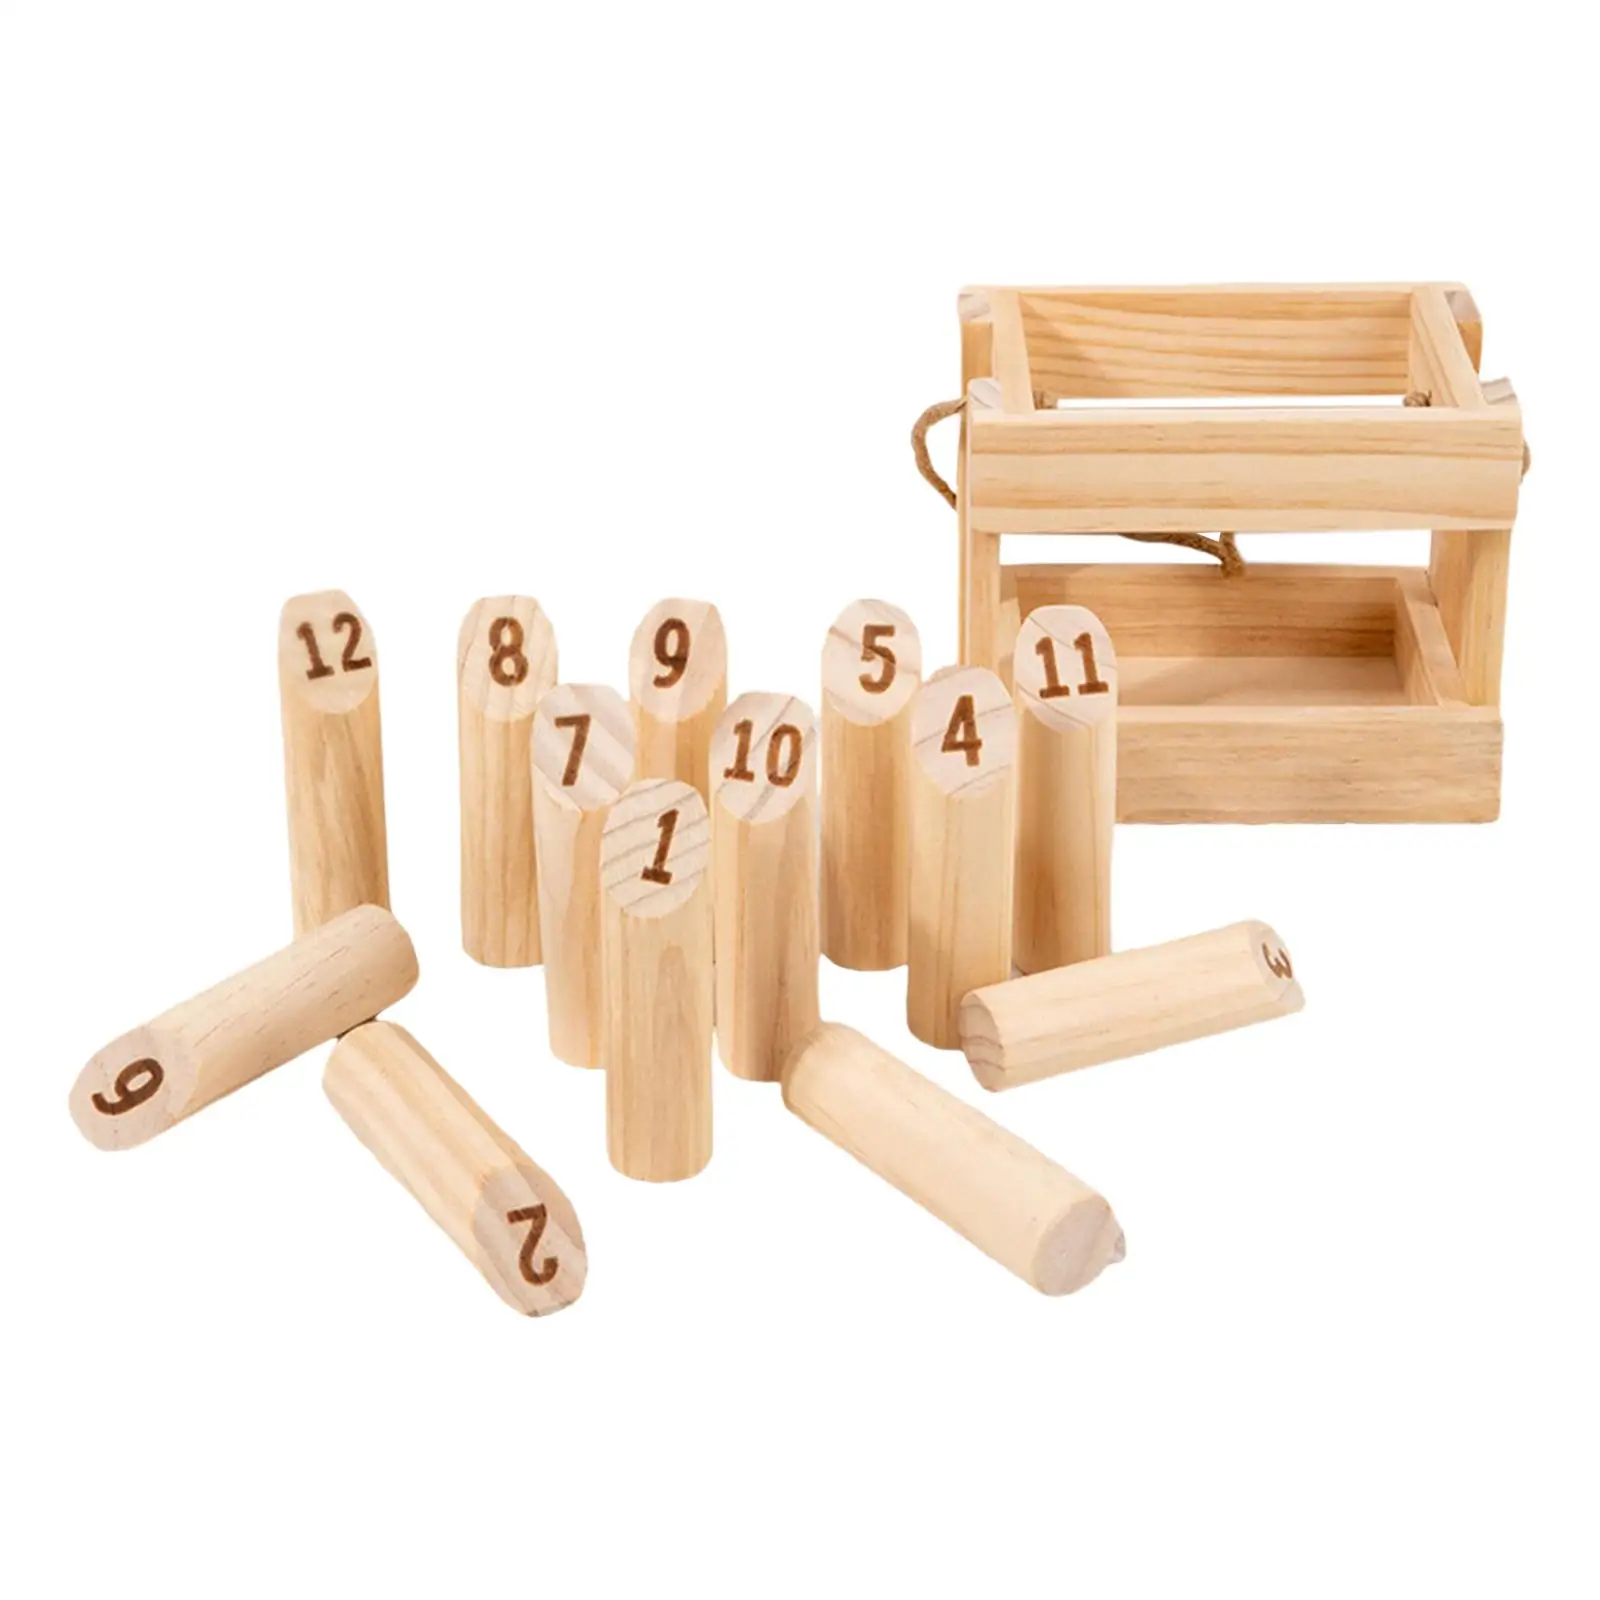 Wooden Tossing Game Premium Hardwood Throwing Scatter with Storage Basket for All Ages